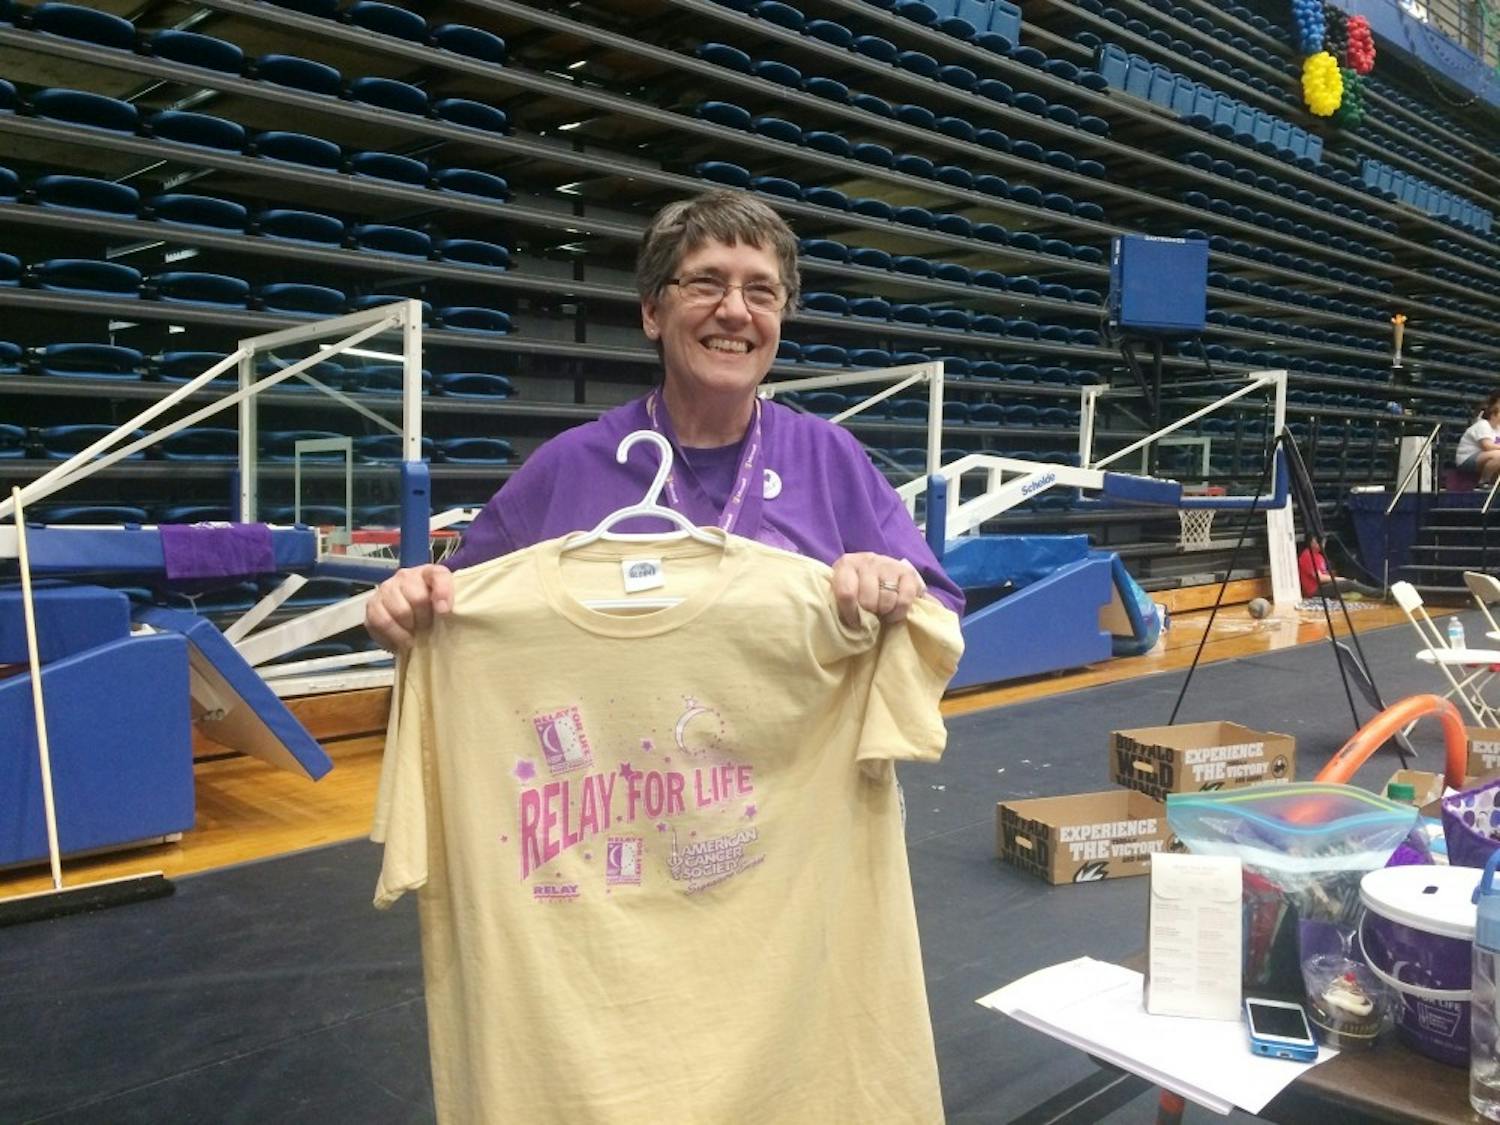 Survivor, teammate, committee member and honored guest Pricilla Snider displays the Relay for Life t-shirt from 1997.